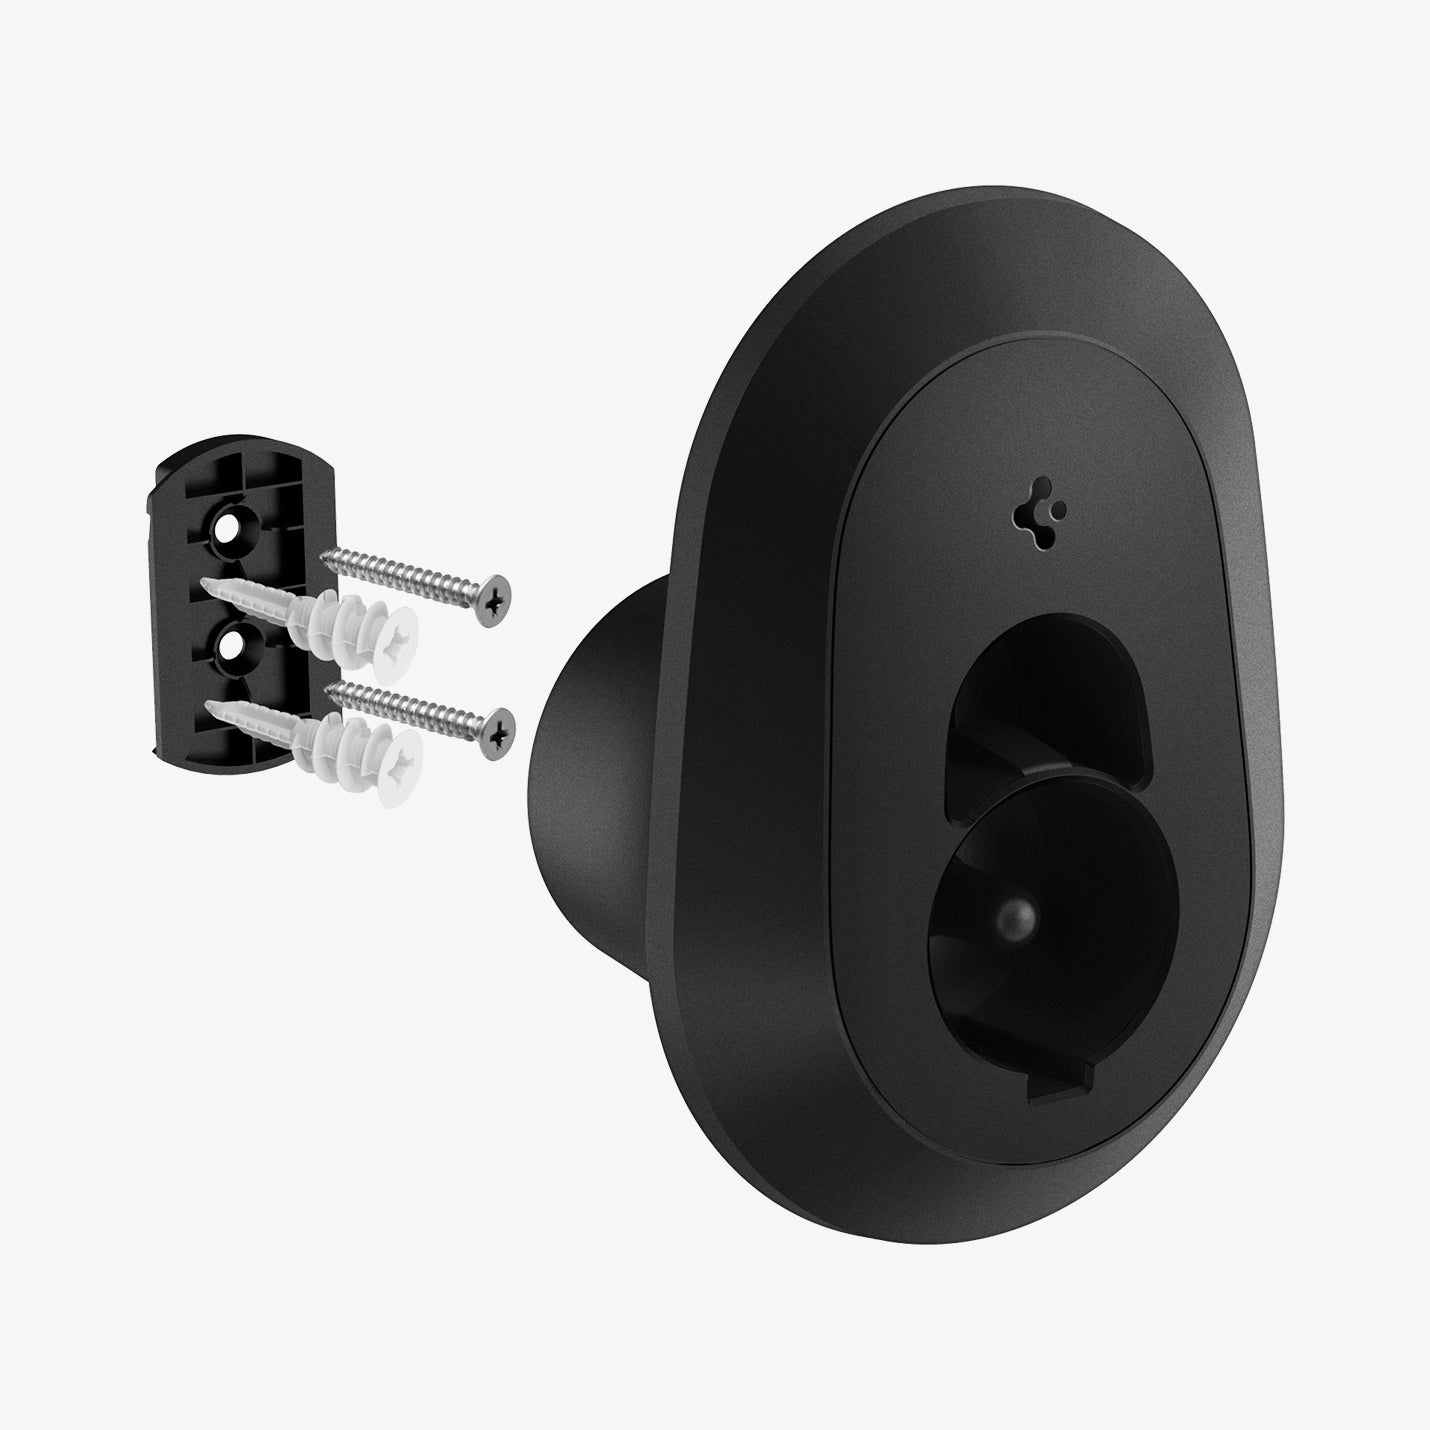 ACP04293 - EV Charger Cable Holder in black showing the cable holder hovering in front of mounting screws